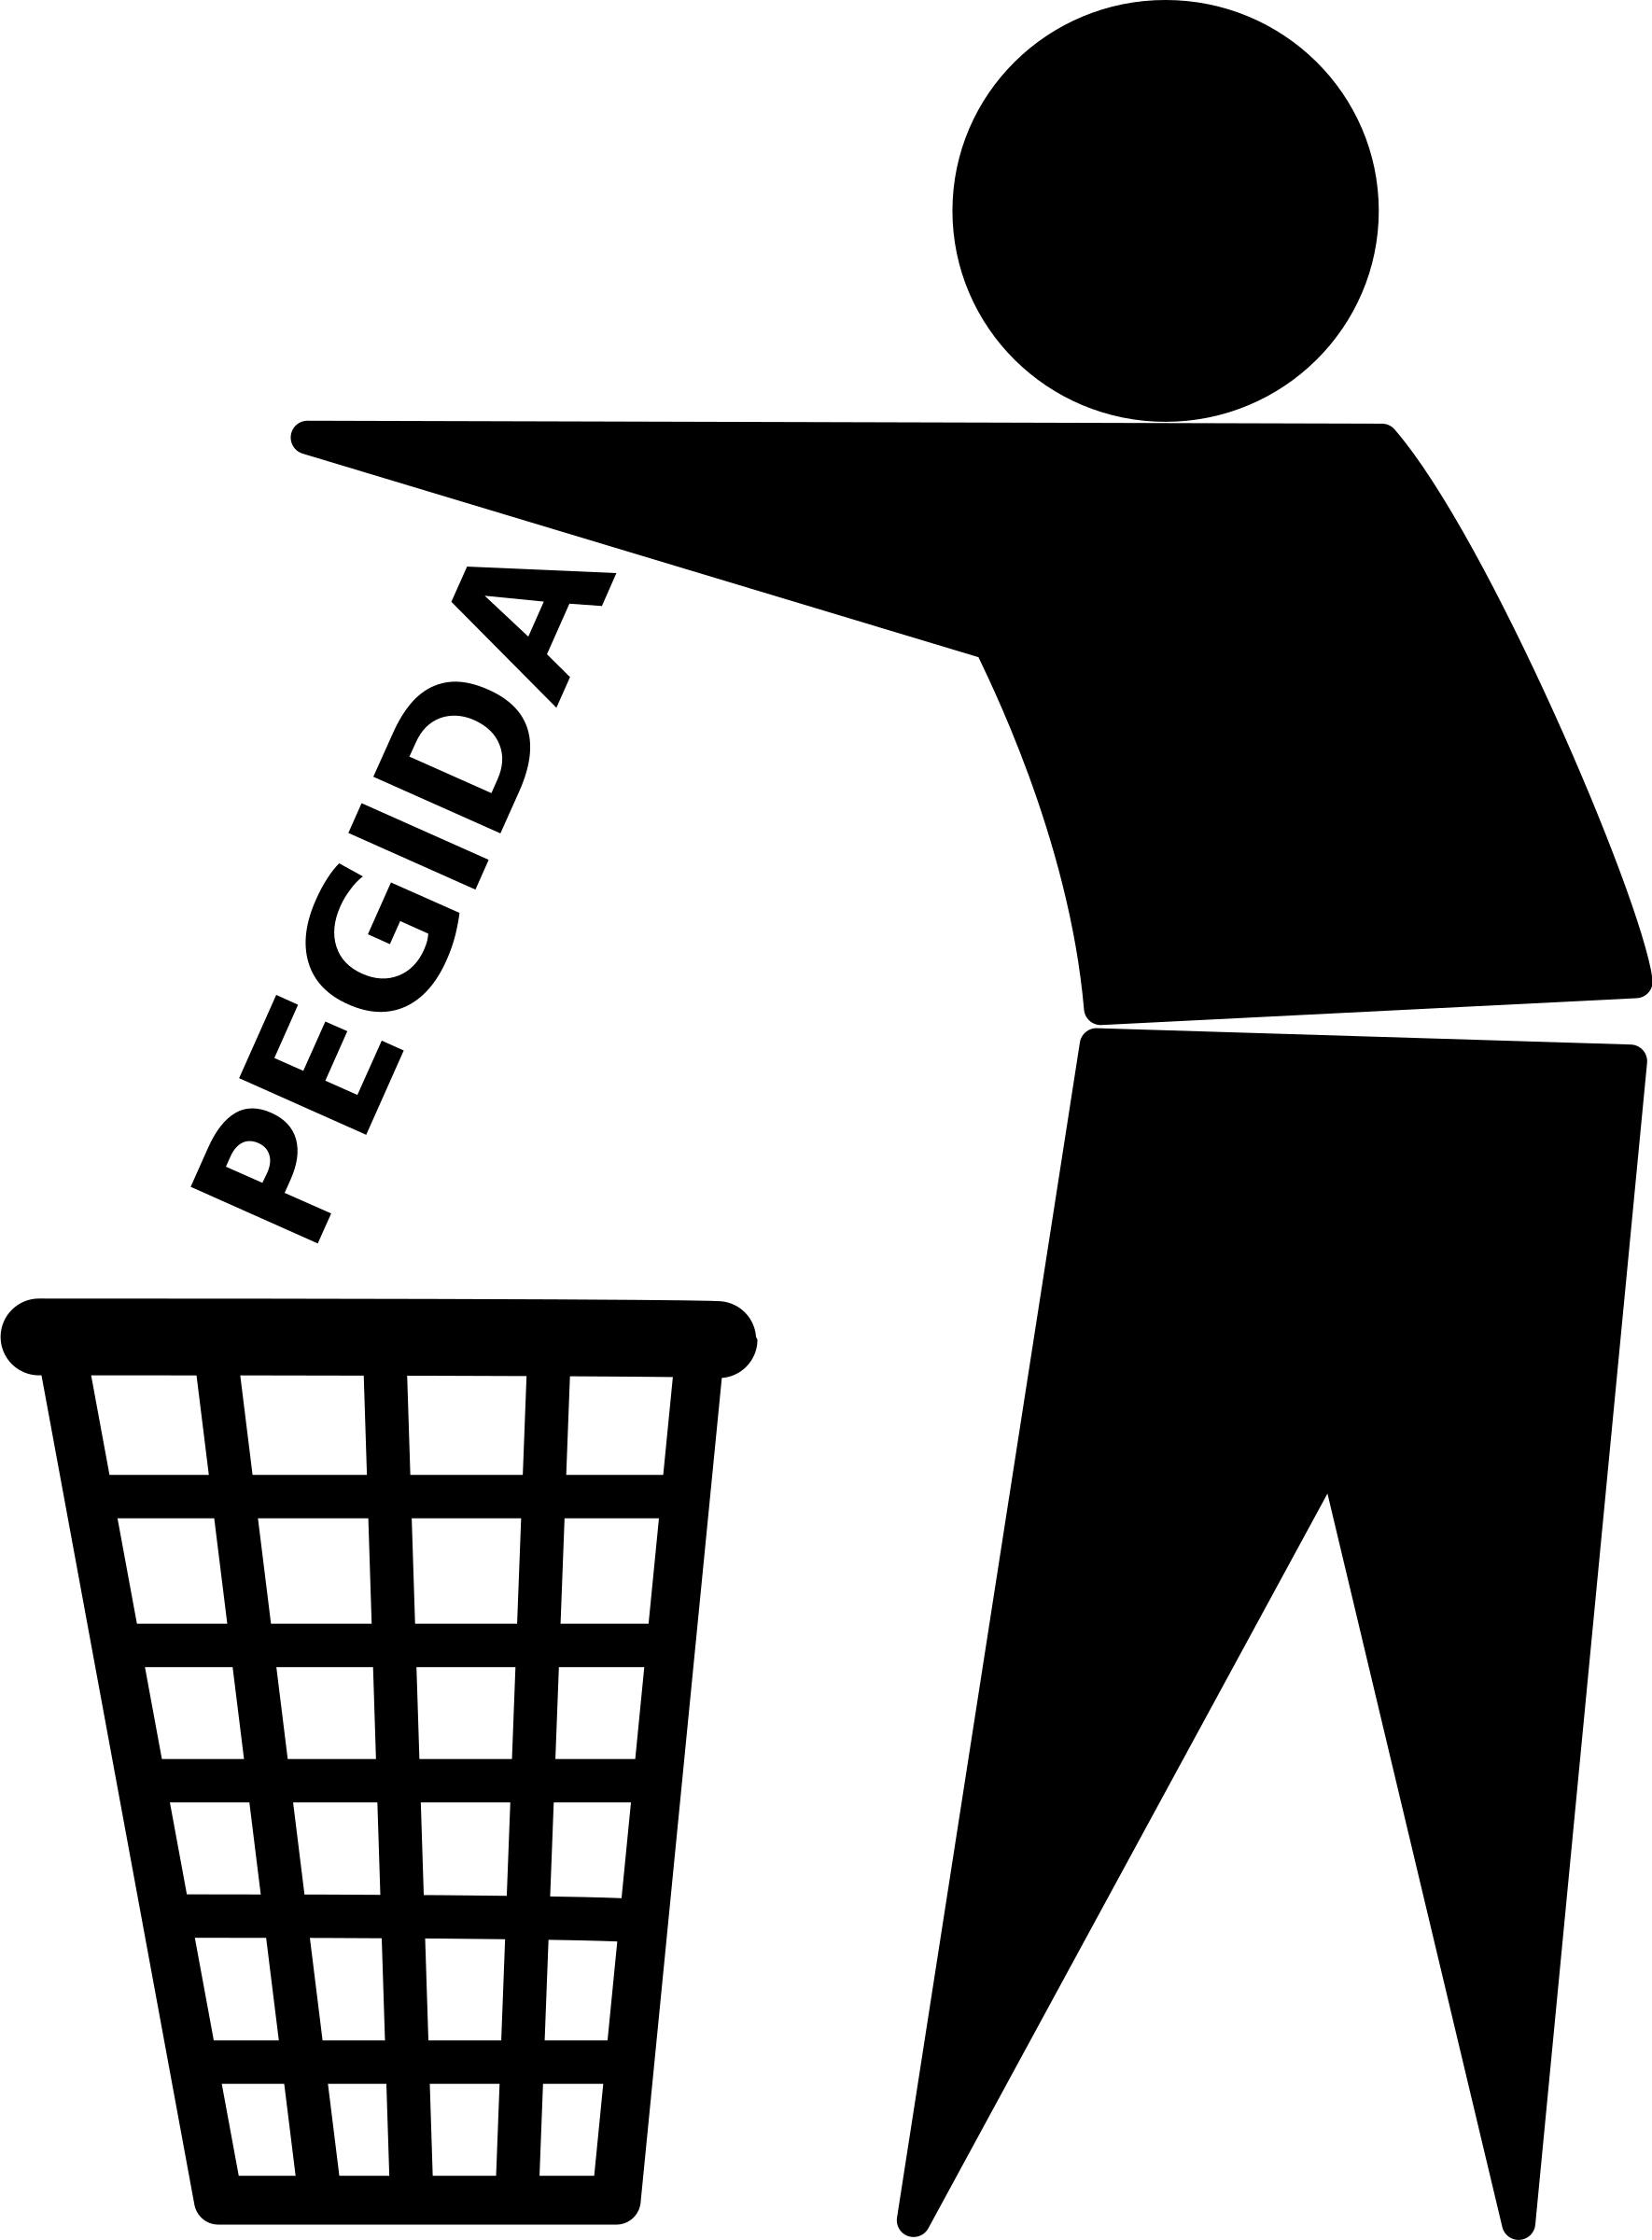 Pegida into the garbage png